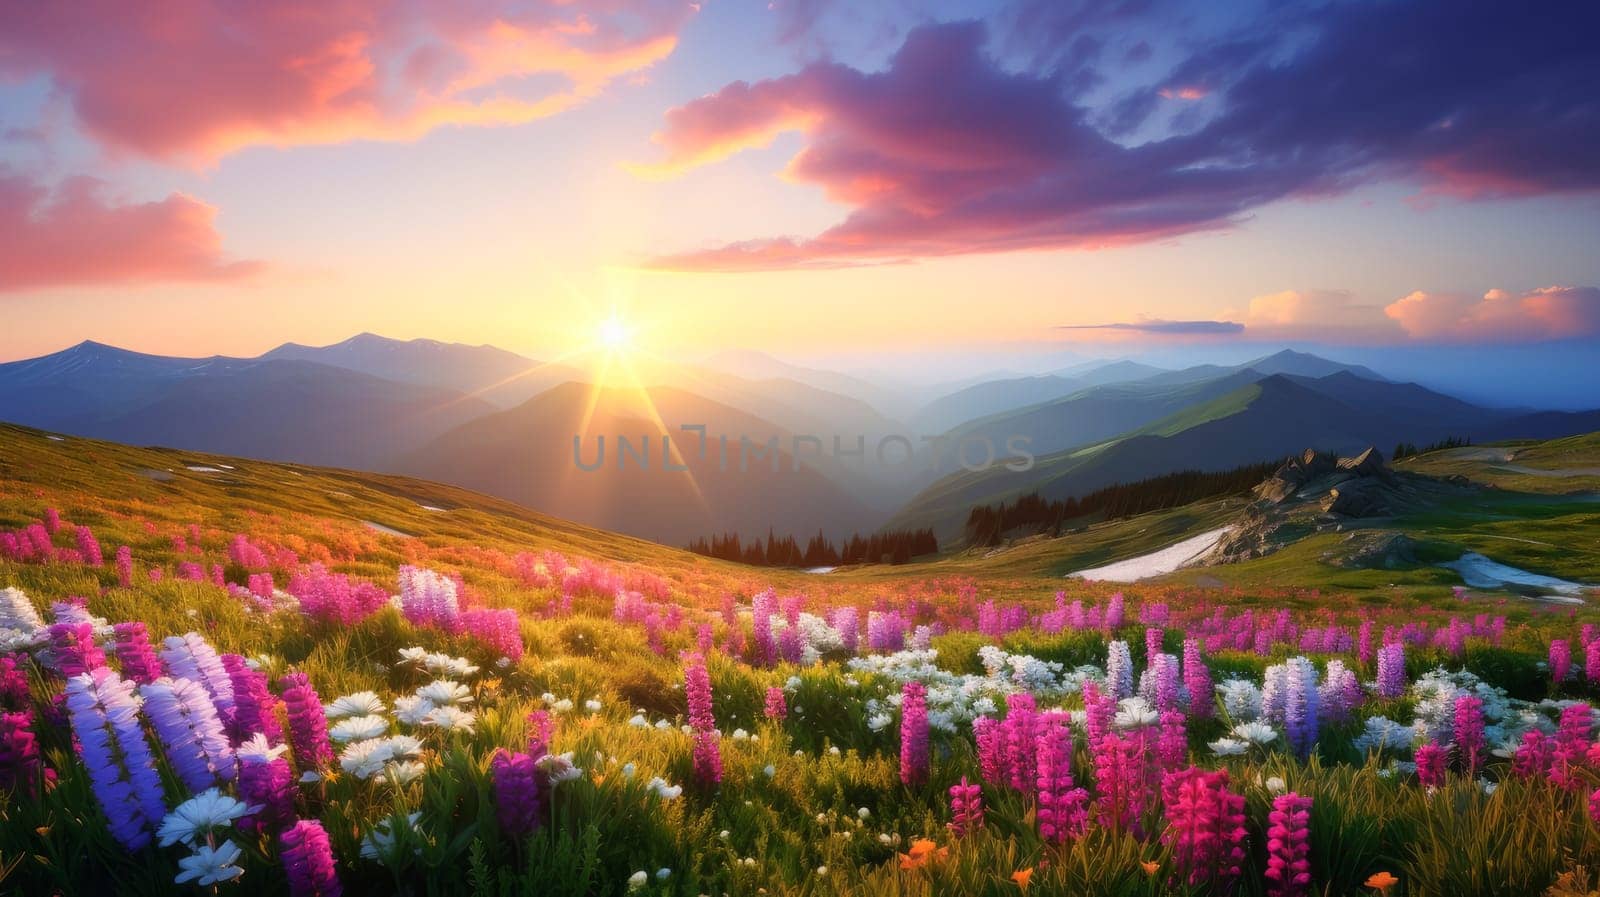 Beautiful alpine meadows with wildflowers in pink light. Beautiful landscape, picture, phone screensaver, copy space, advertising, travel agency, tourism, solitude with nature, without people.